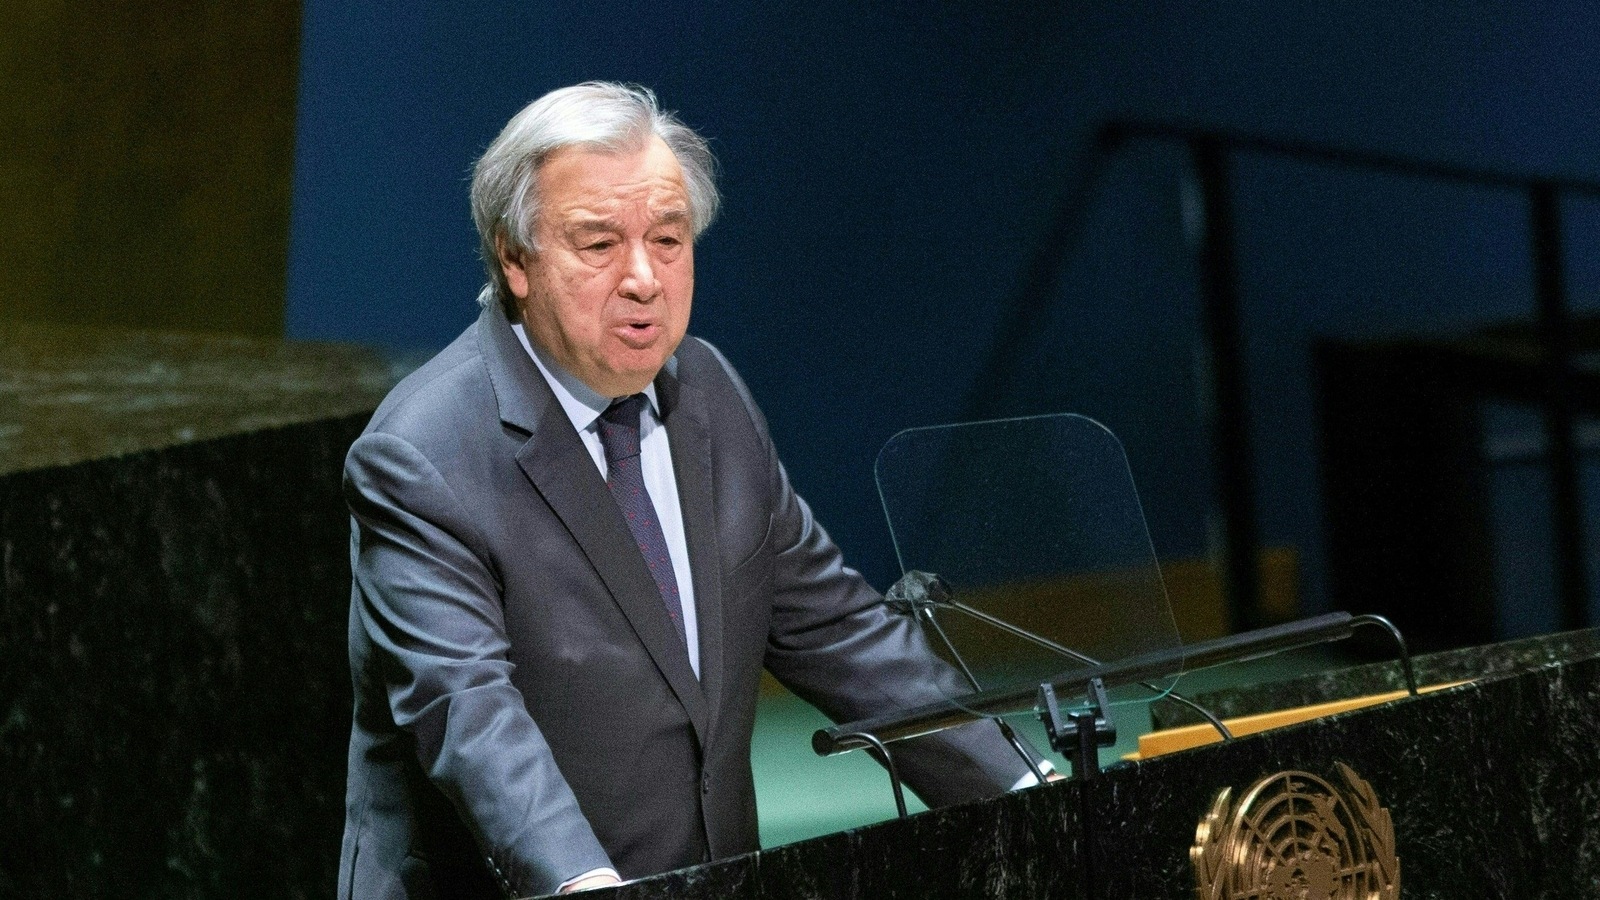 World 'sleepwalking' to climate catastrophe, problem getting worse: UN chief